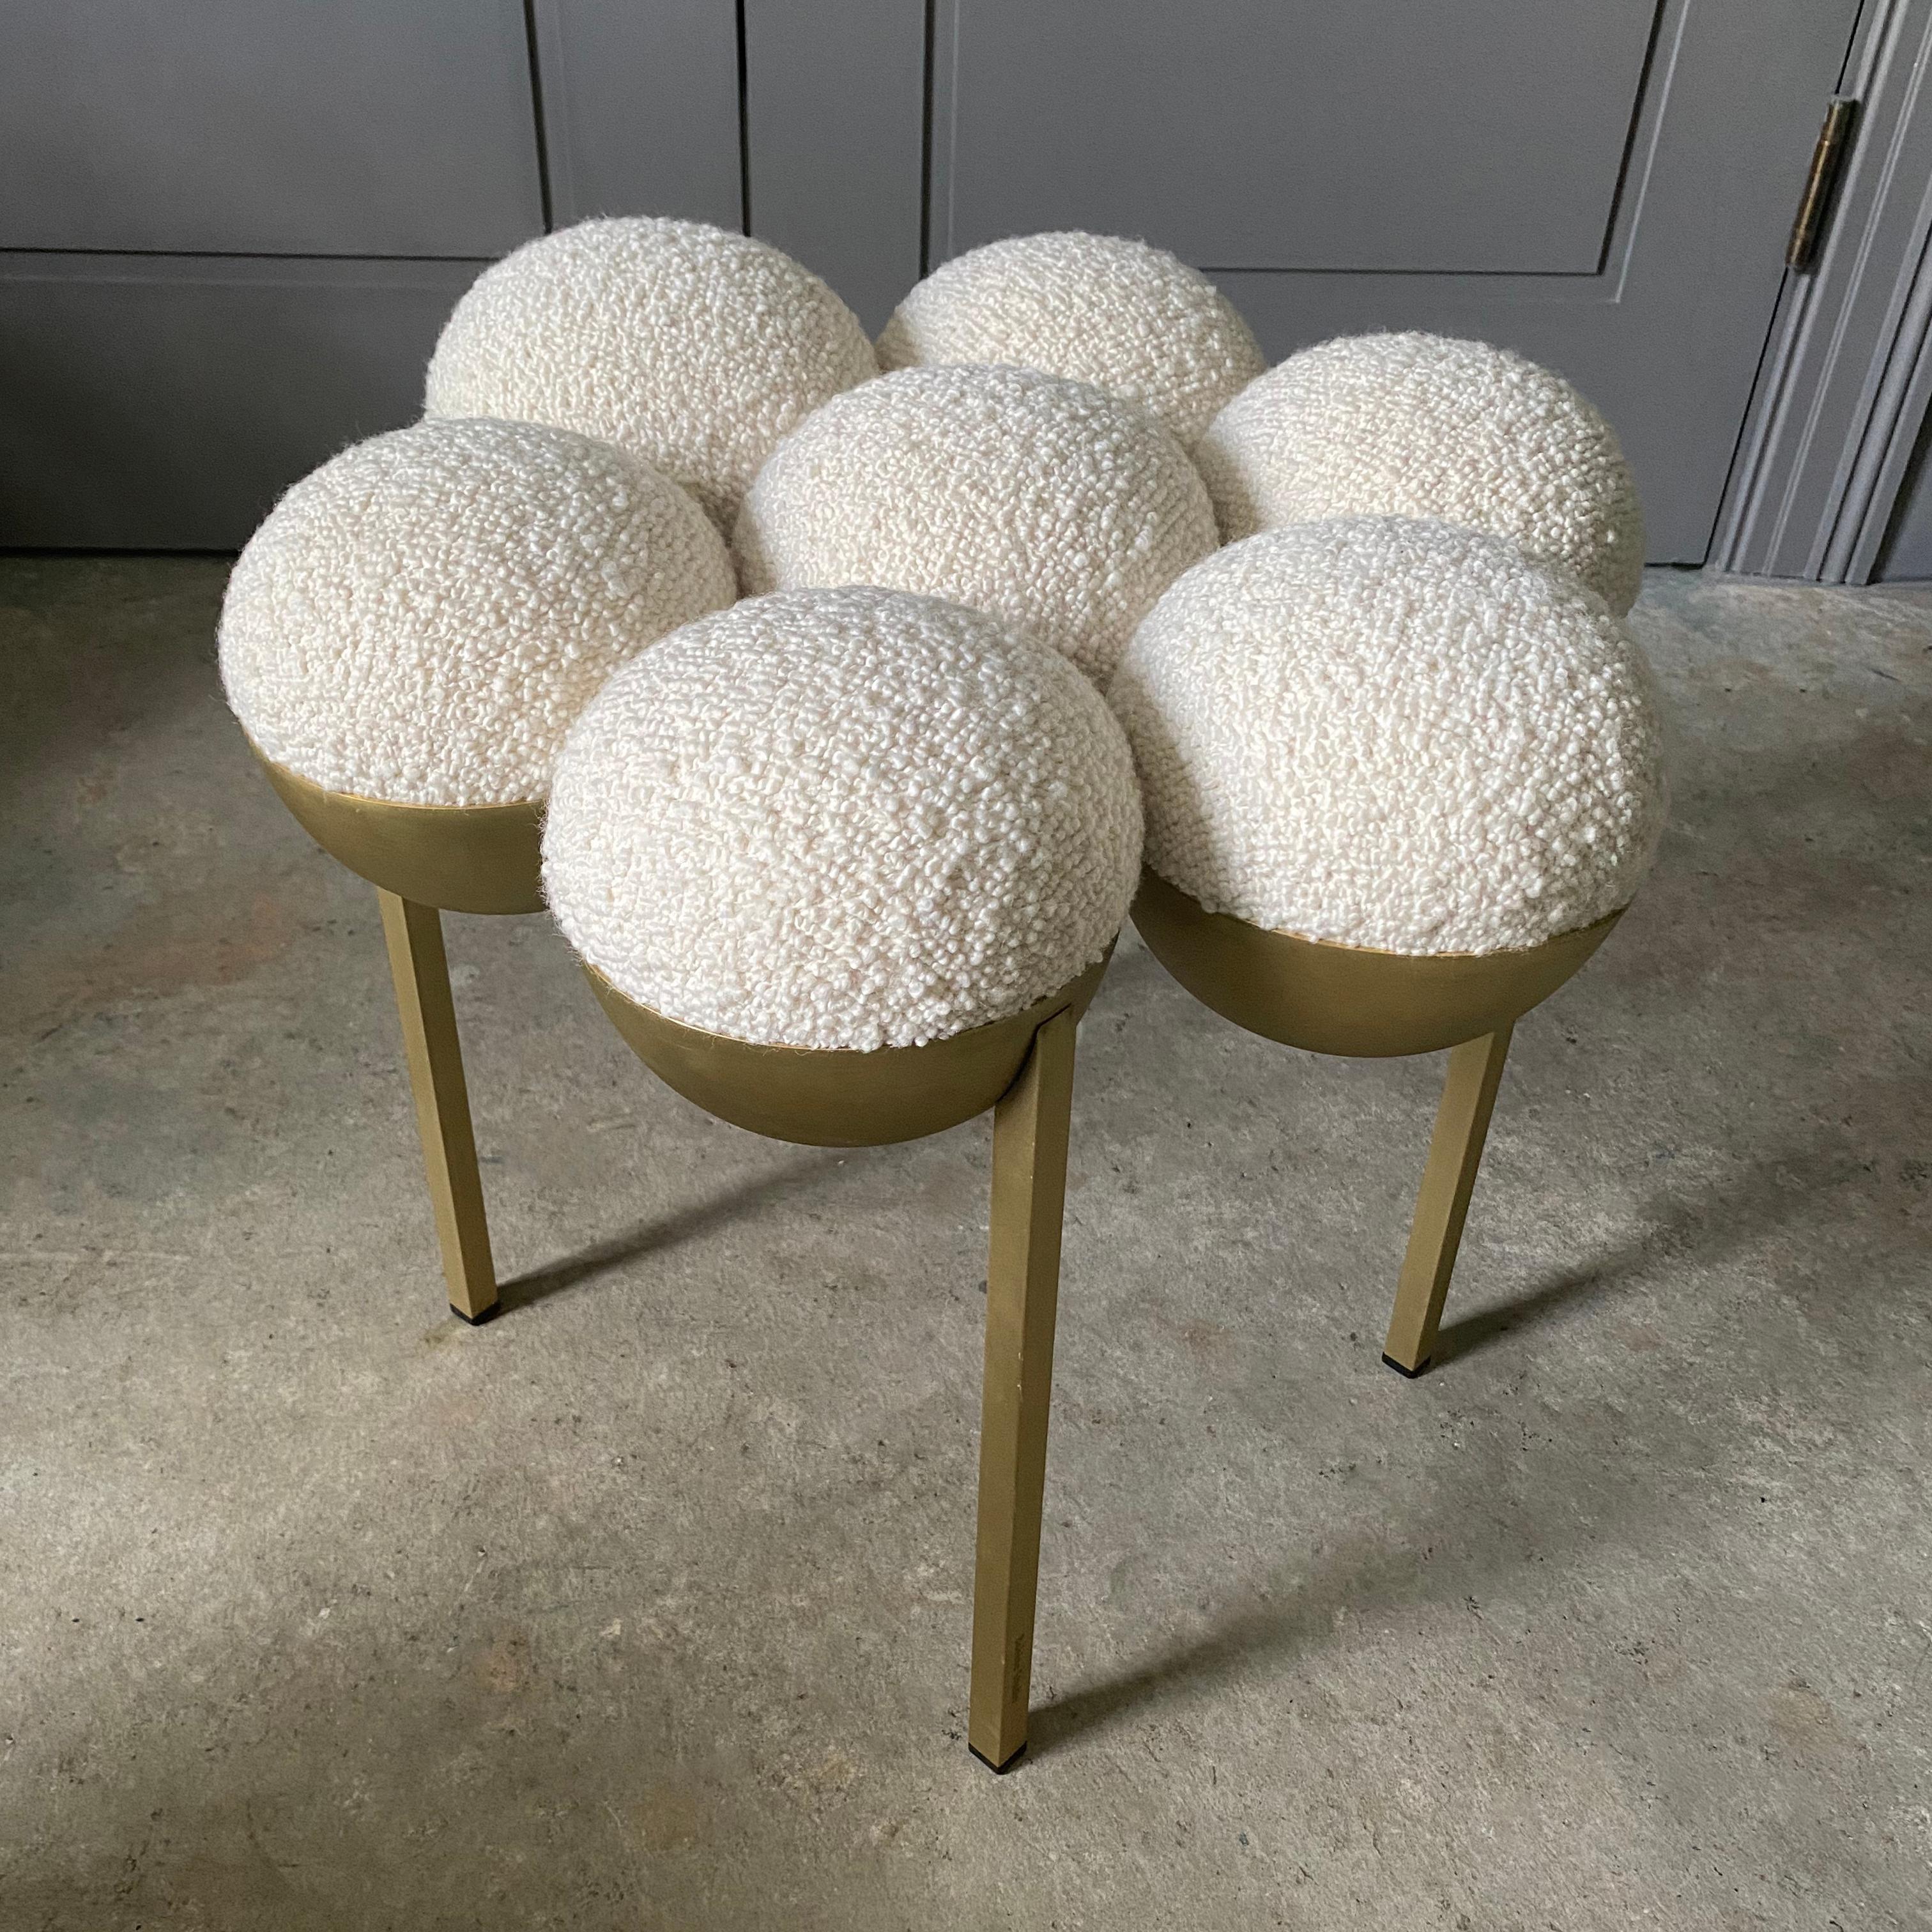 Metalwork Saturn Pouffe Small, Brass Frame and Ivory Fabric by Lara Bohinc For Sale